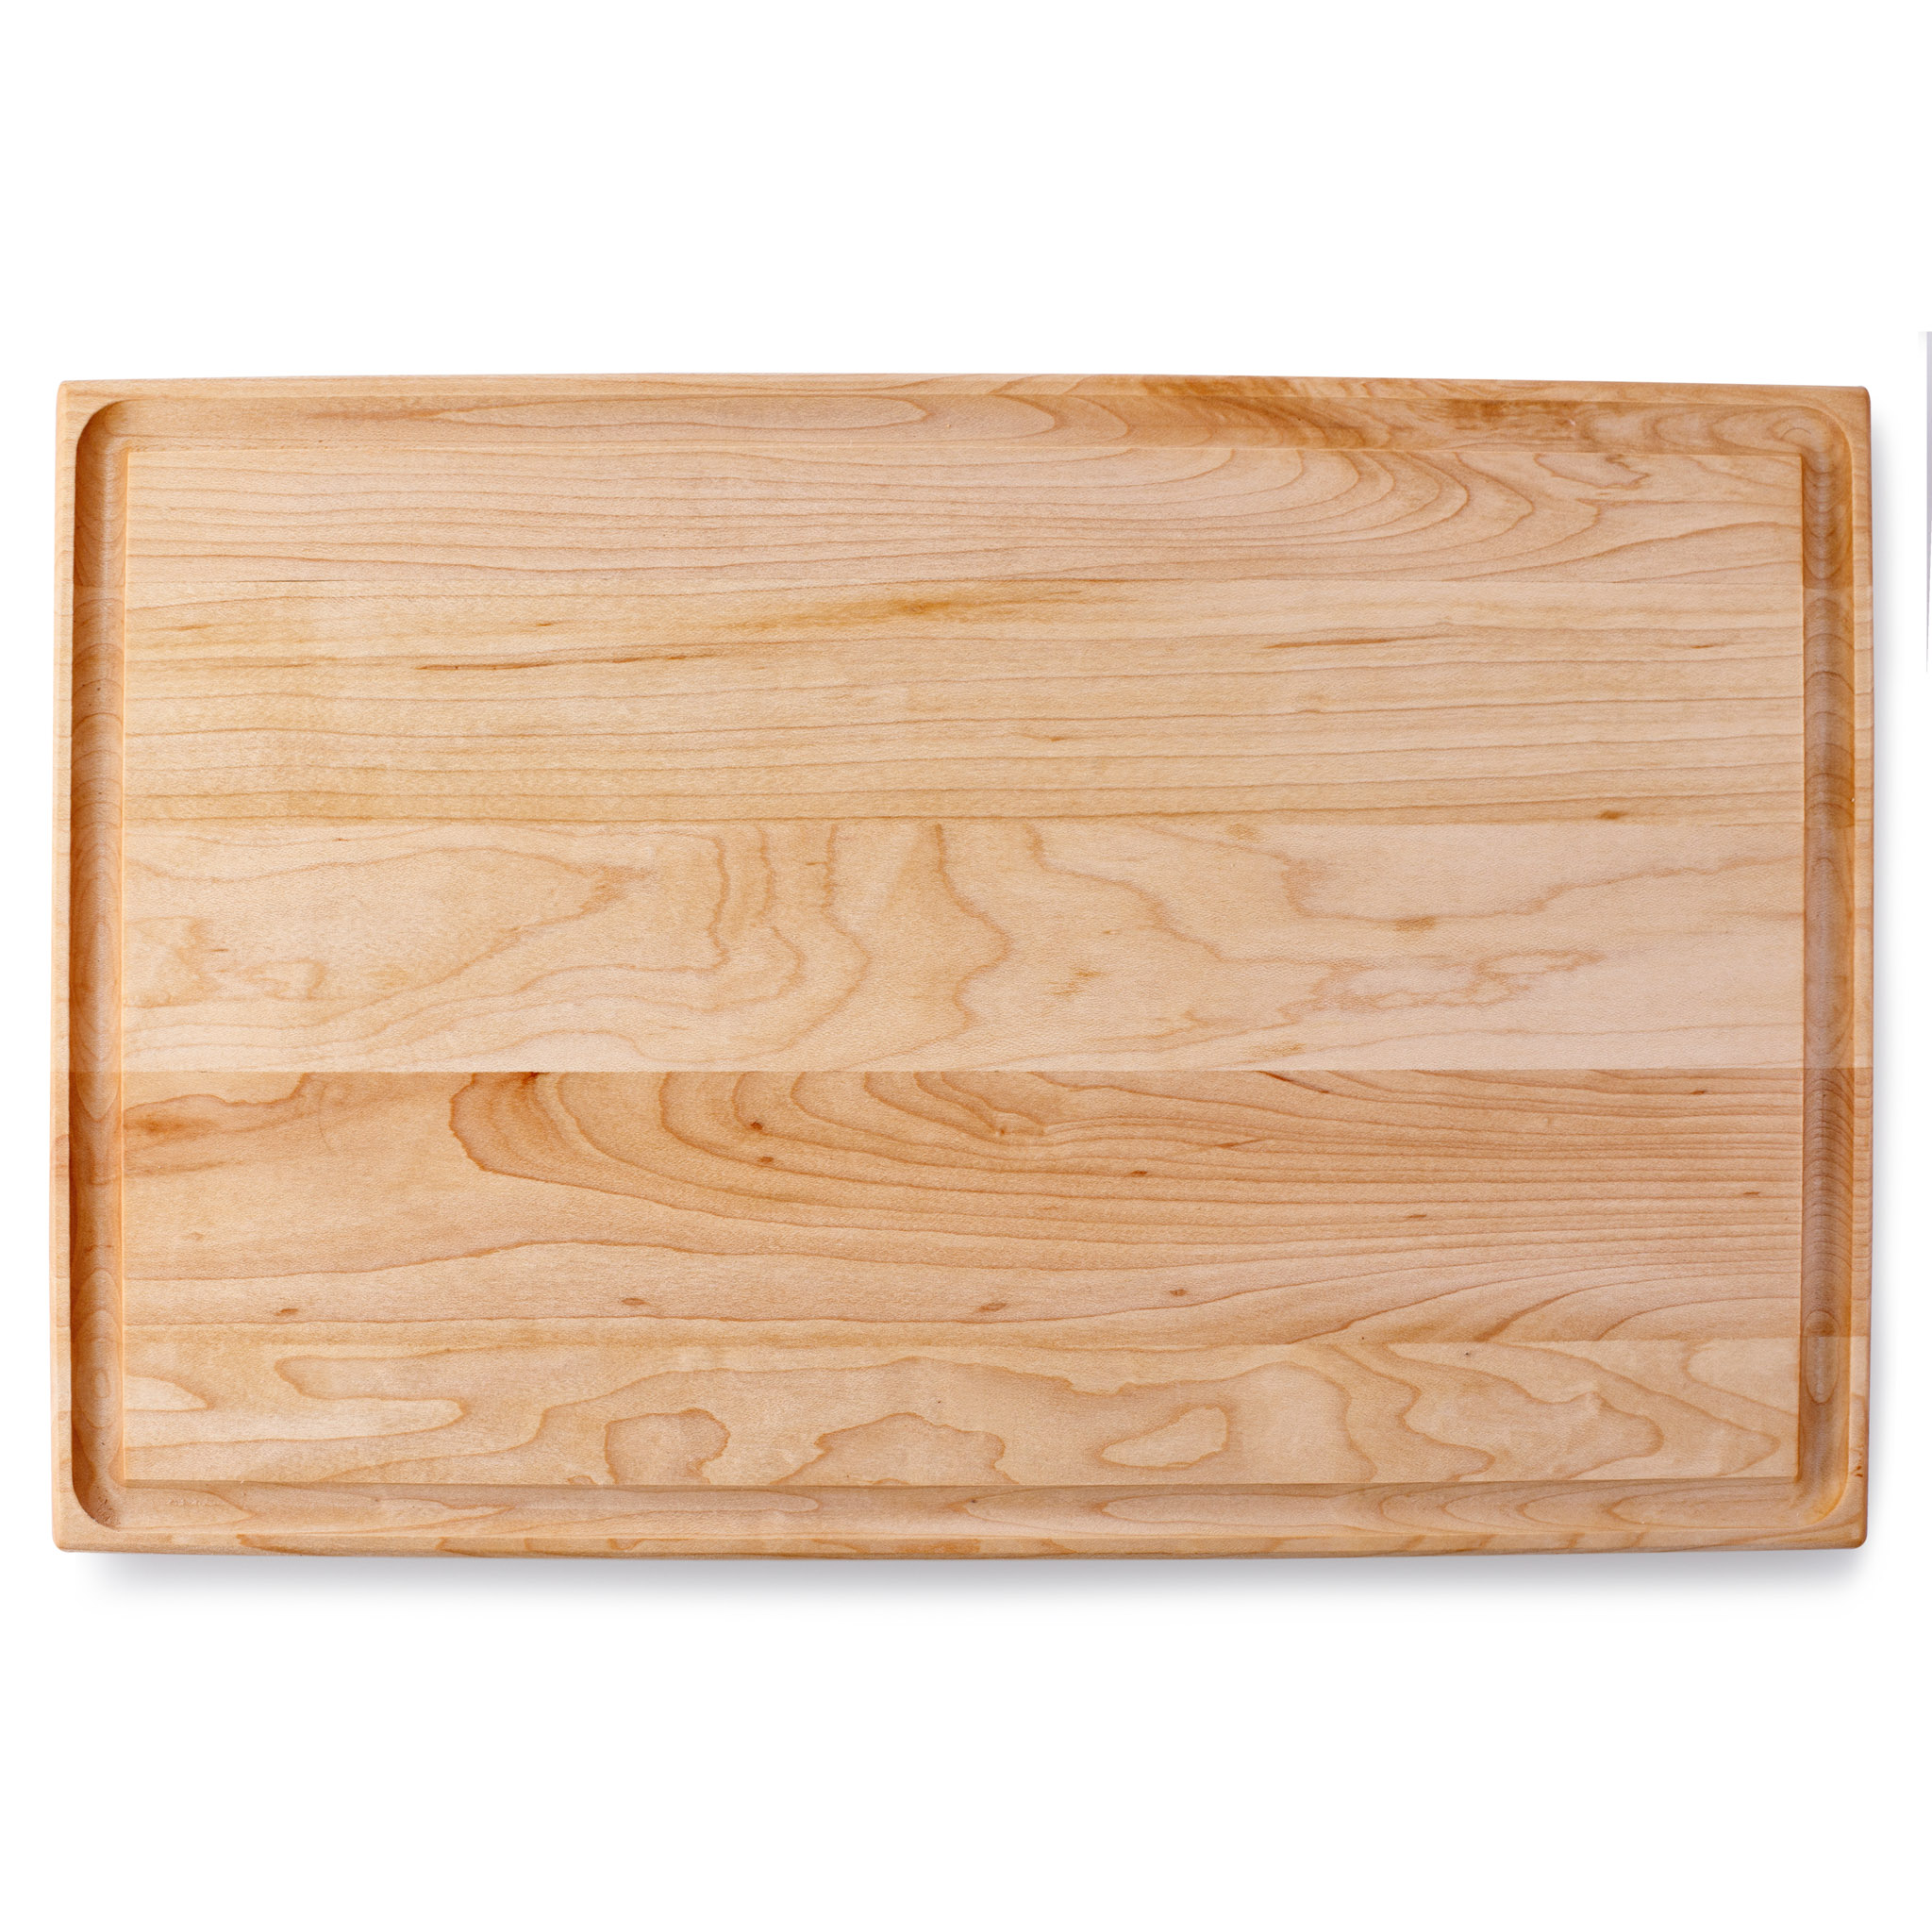 https://forest-decor.com/wp-content/uploads/Large-Wood-Cutting-Board-with-Juice-Groove-Maple-17x11-1.jpg